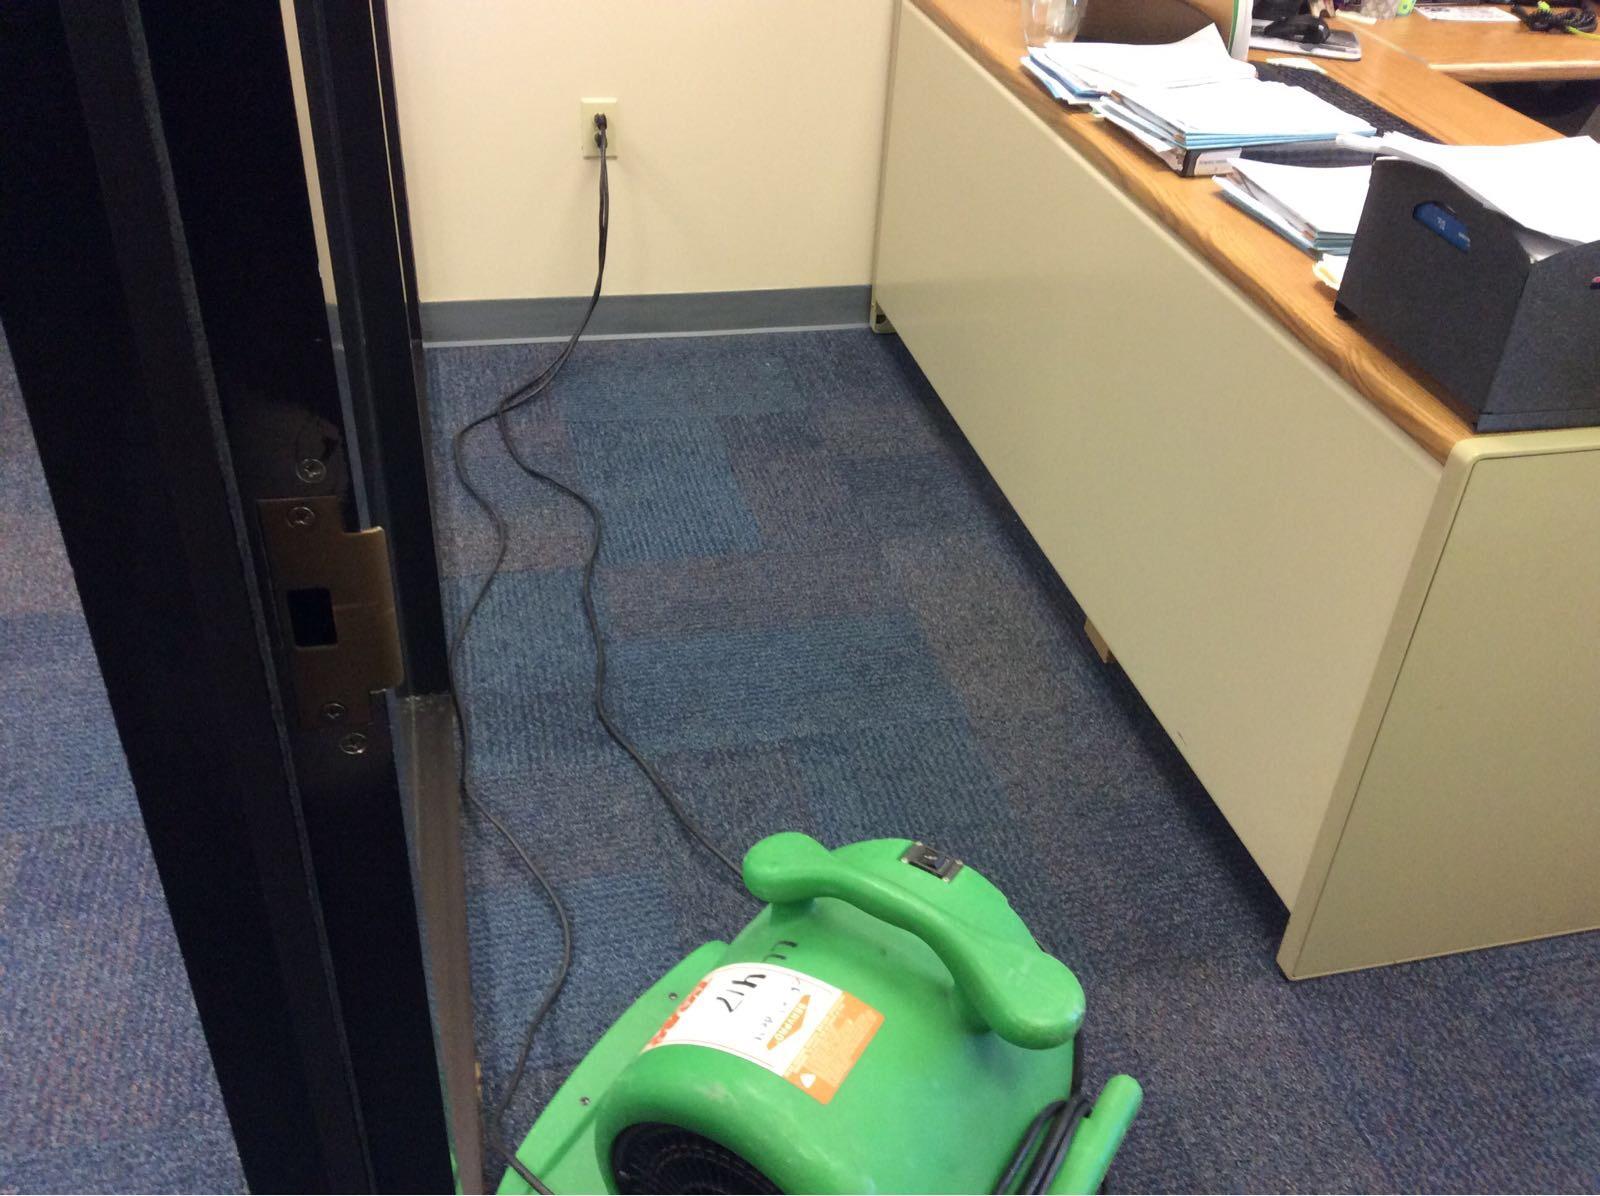 Commercial water damage restoration and cleanup is no problem for our SERVPRO of Lafayette team.